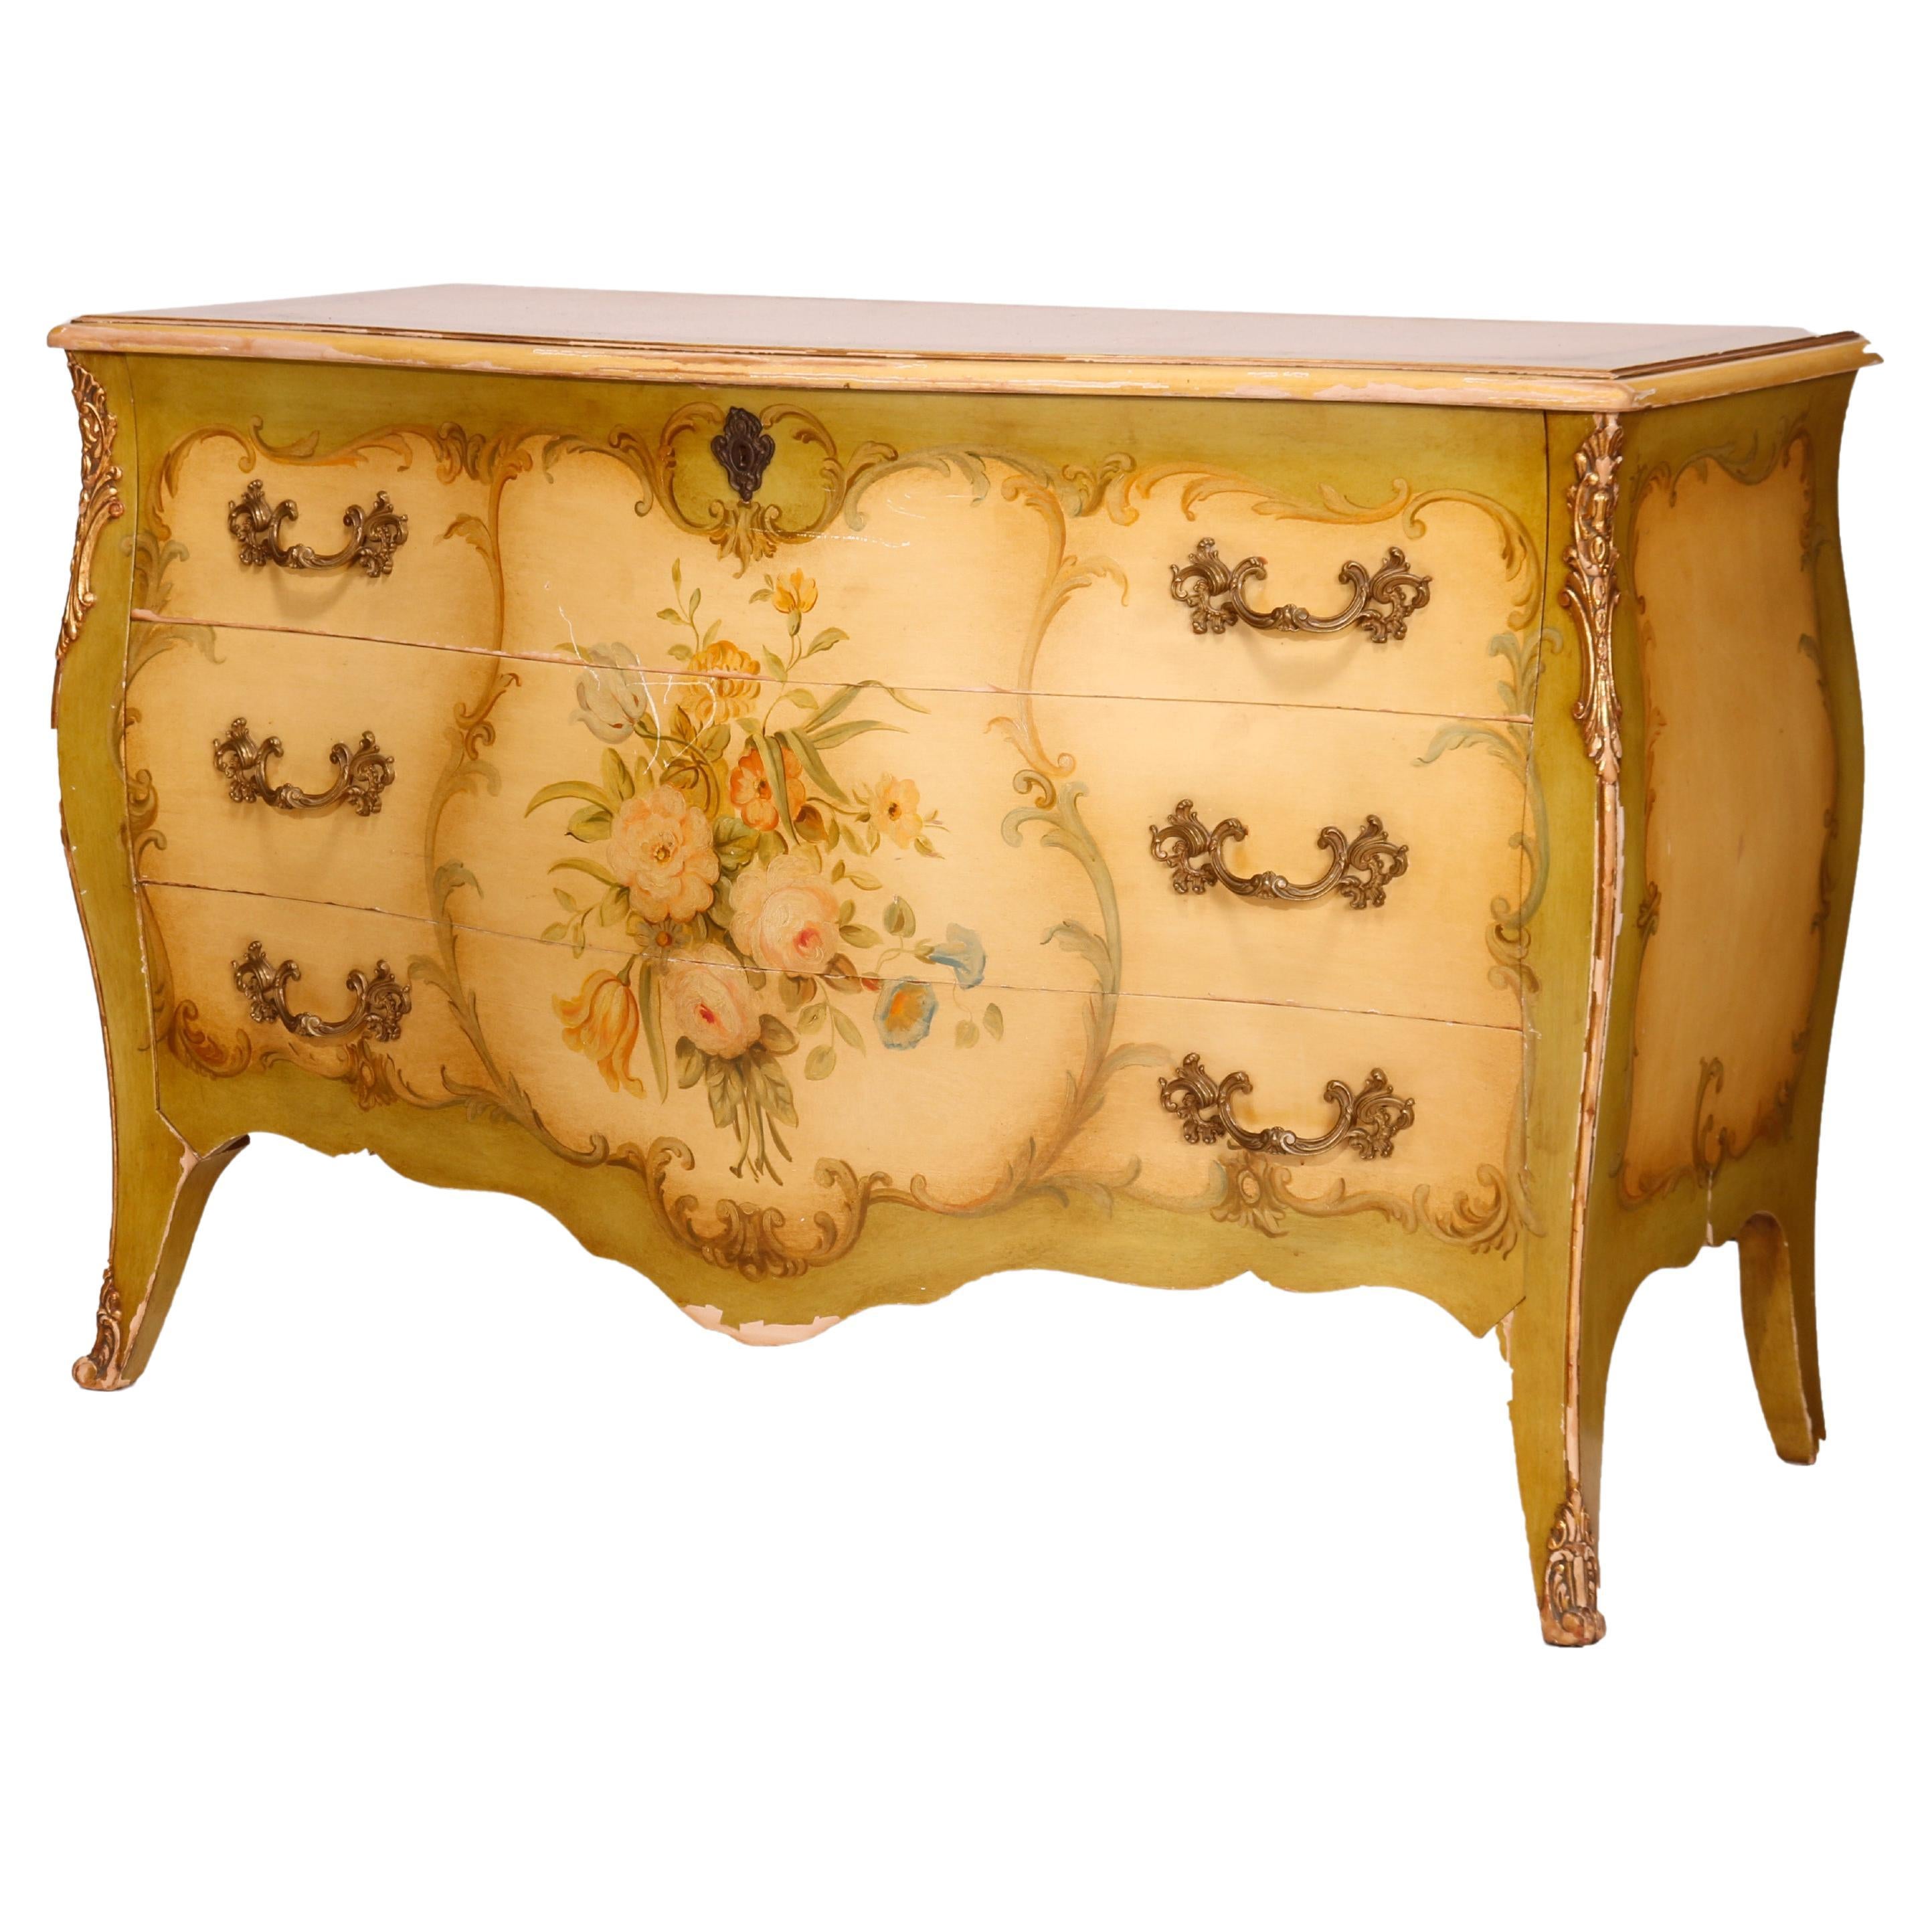 French Louis XV Style Widdicomb Painted & Gilt Bombe Chest 20th C